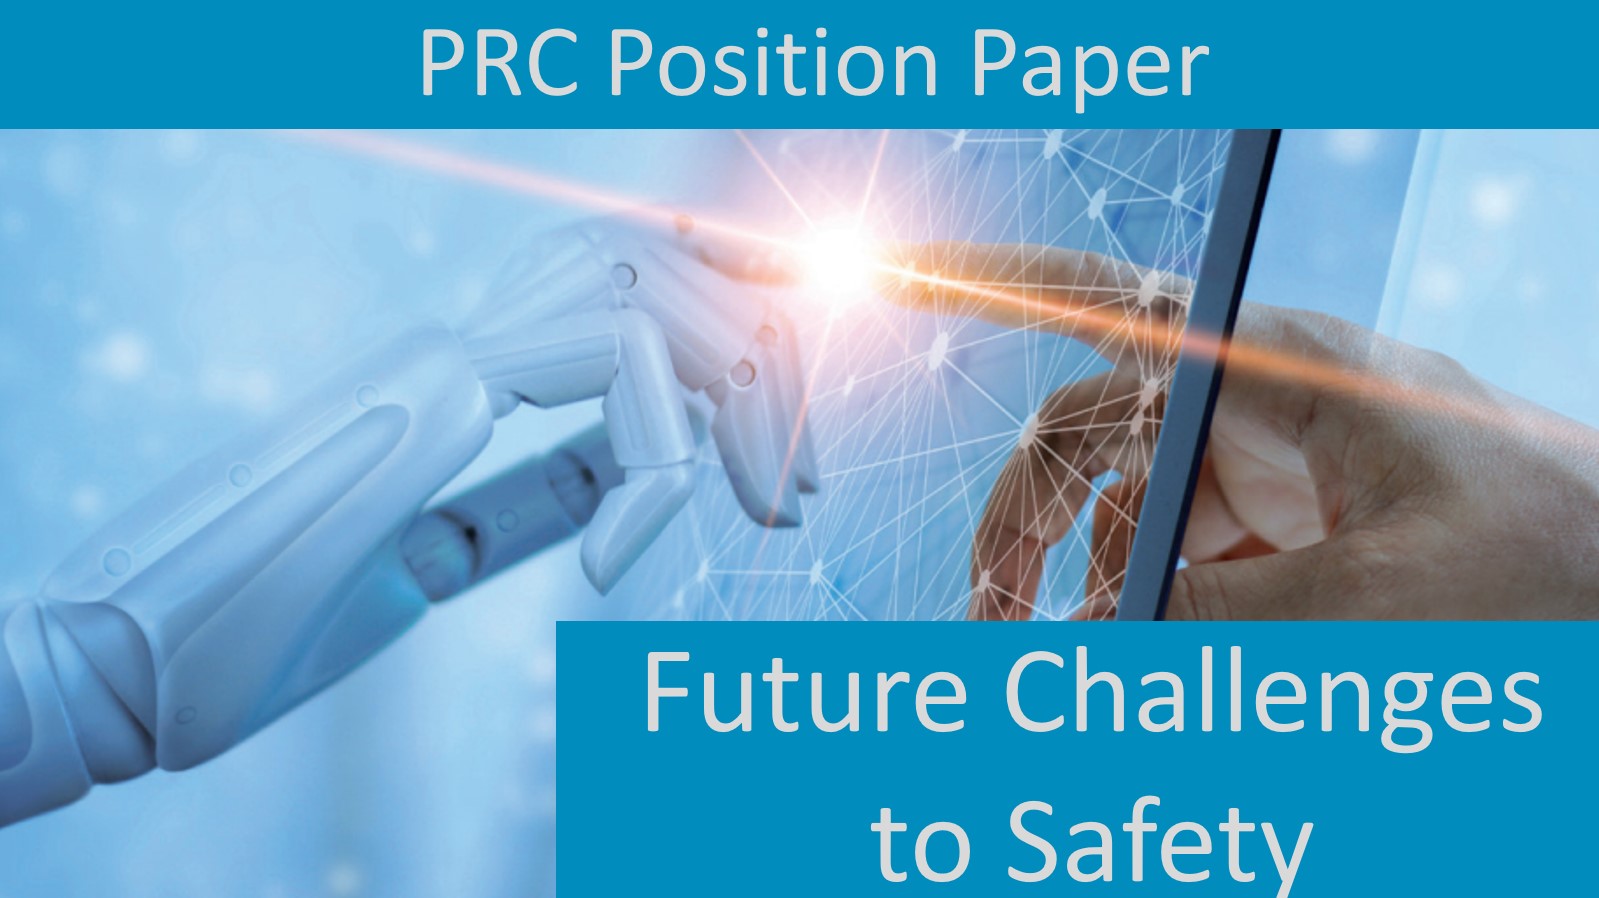 PRC Position Paper - Future challenges to safety